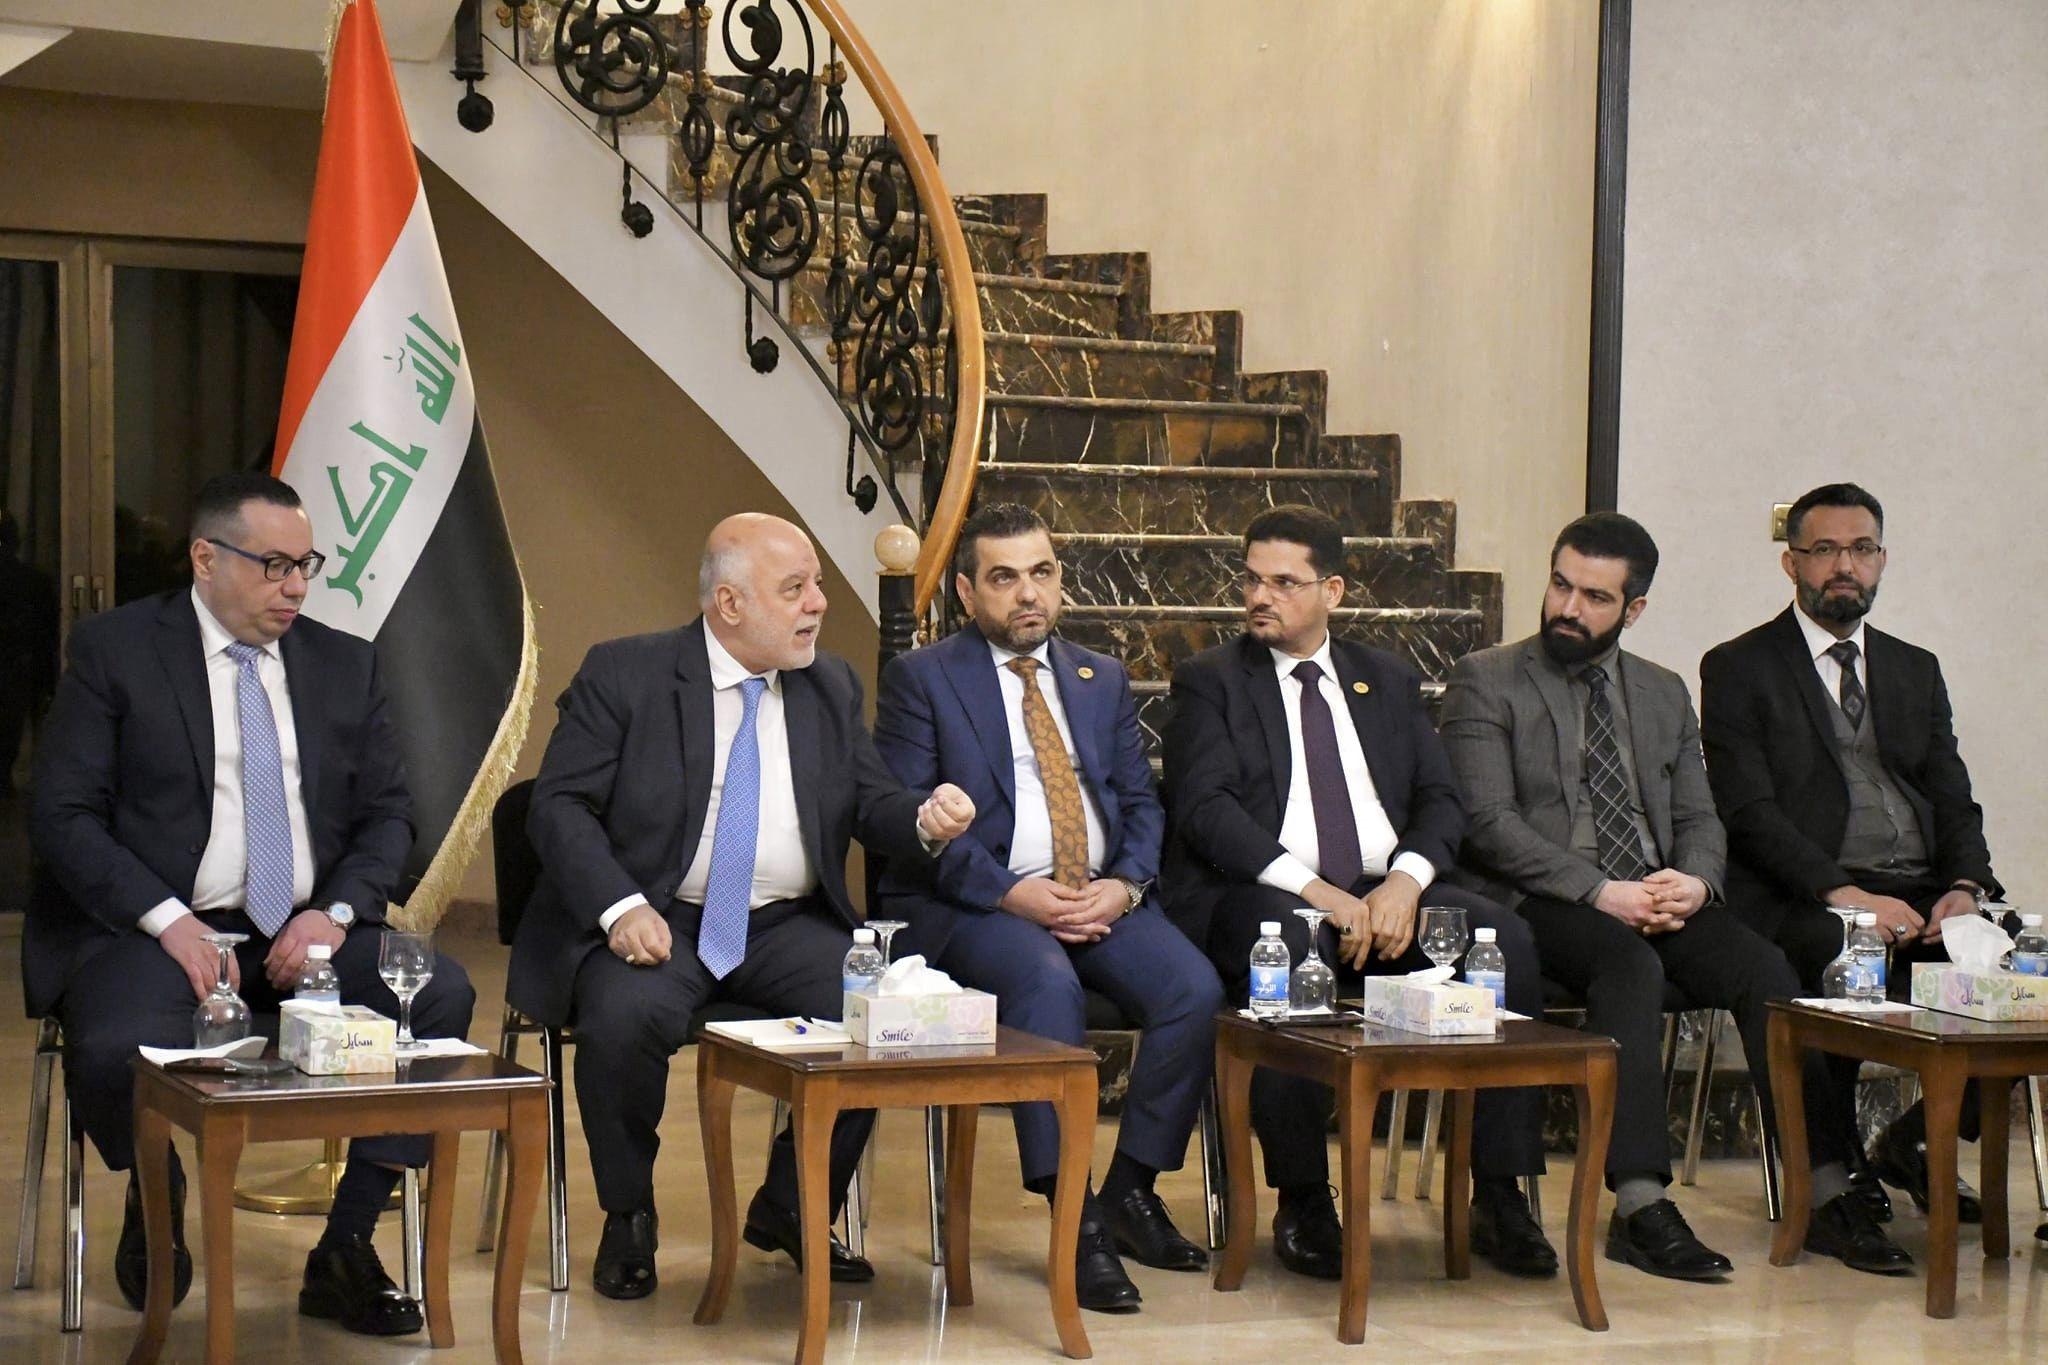 Dr. Haider Al-Abadi during receiving young leaders of political parties and forces: The party system based on sub-identities does not build a state